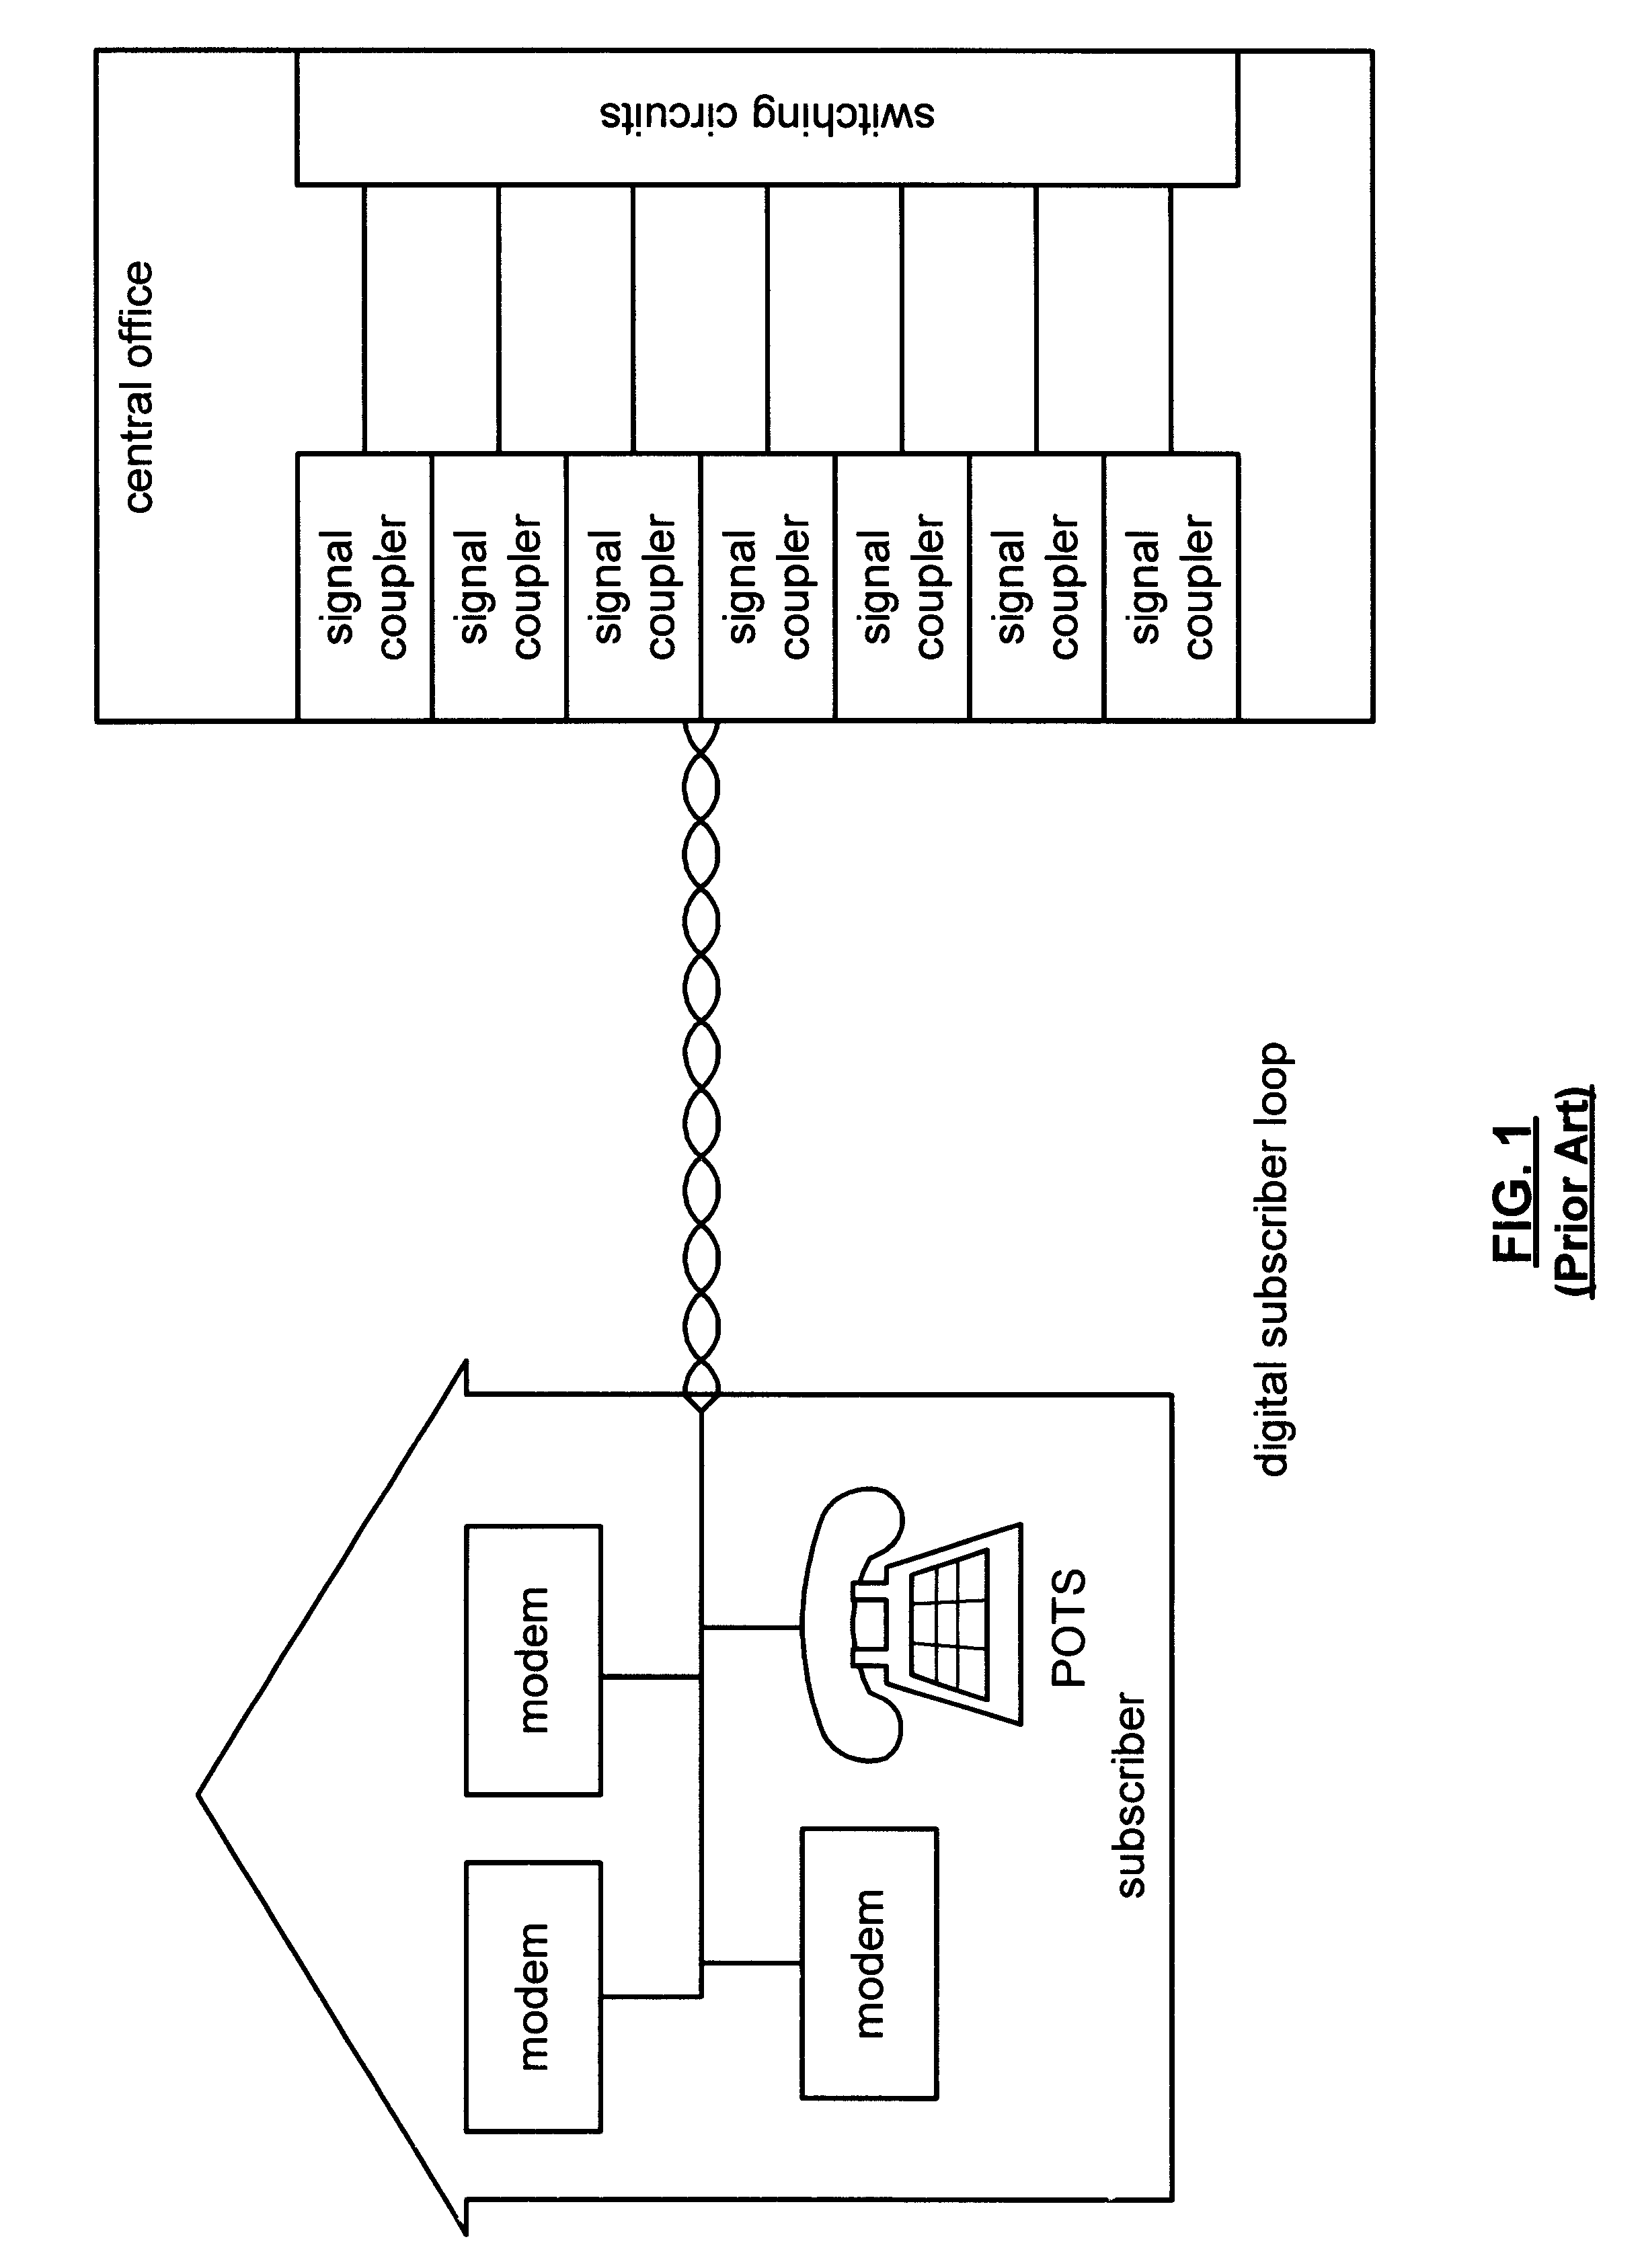 Signal coupler using low voltage filtering